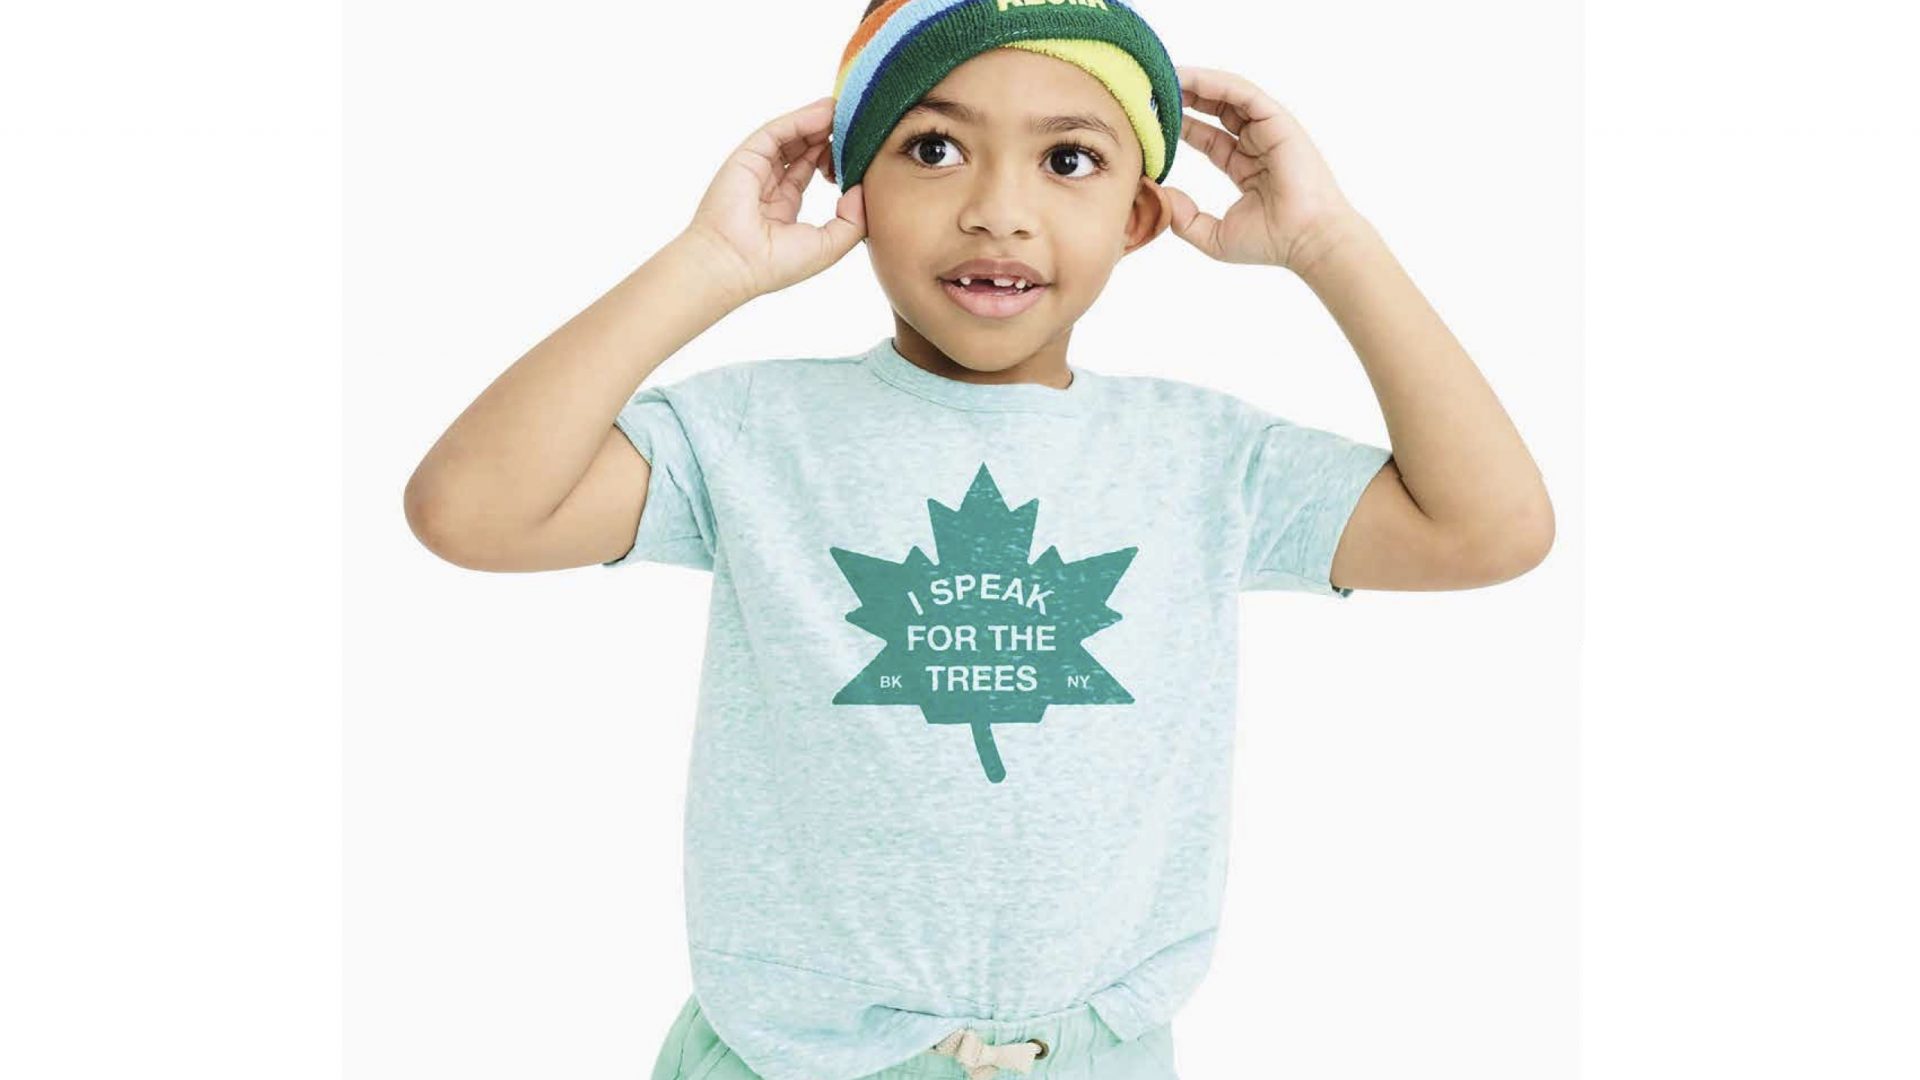 A young boy wearing a headband and shirt with the words 